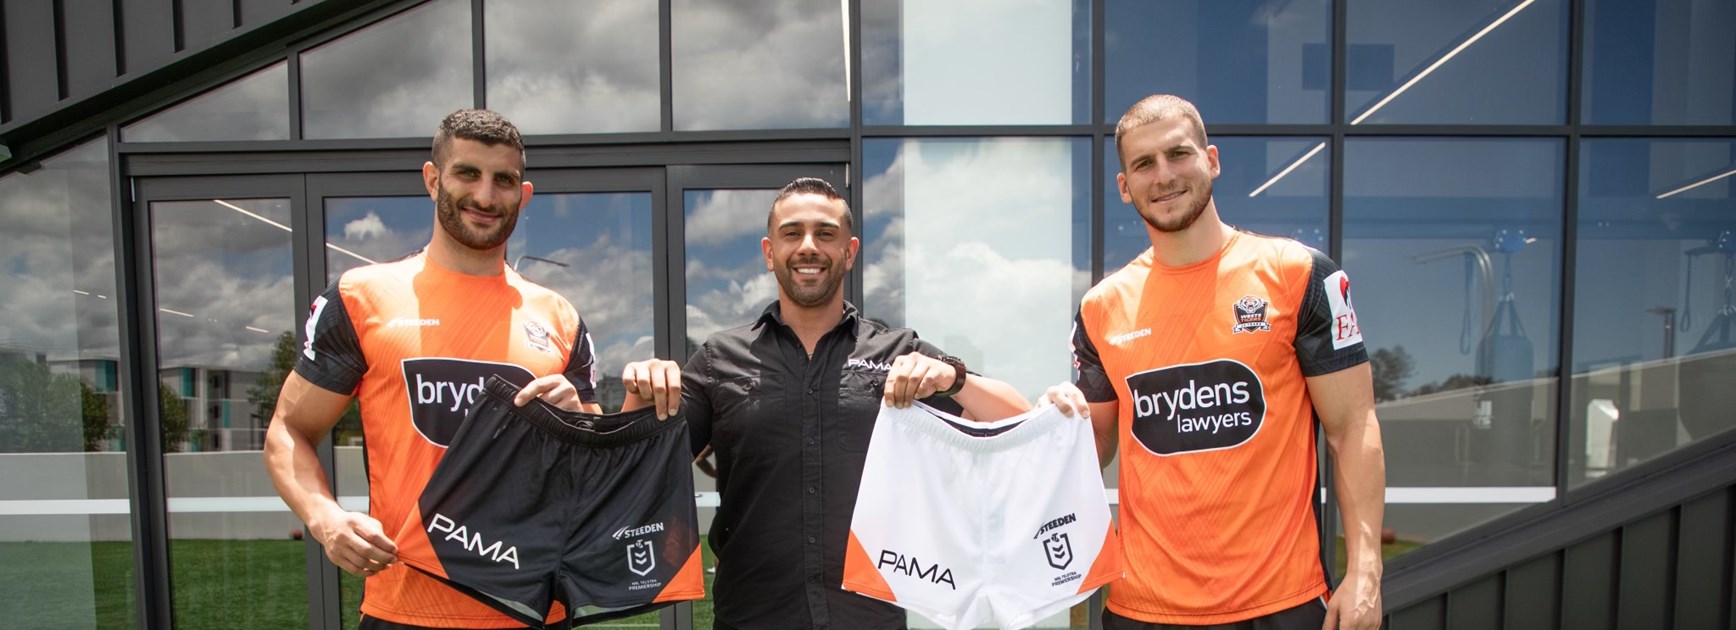 New sponsor PAMA on Wests Tigers shorts